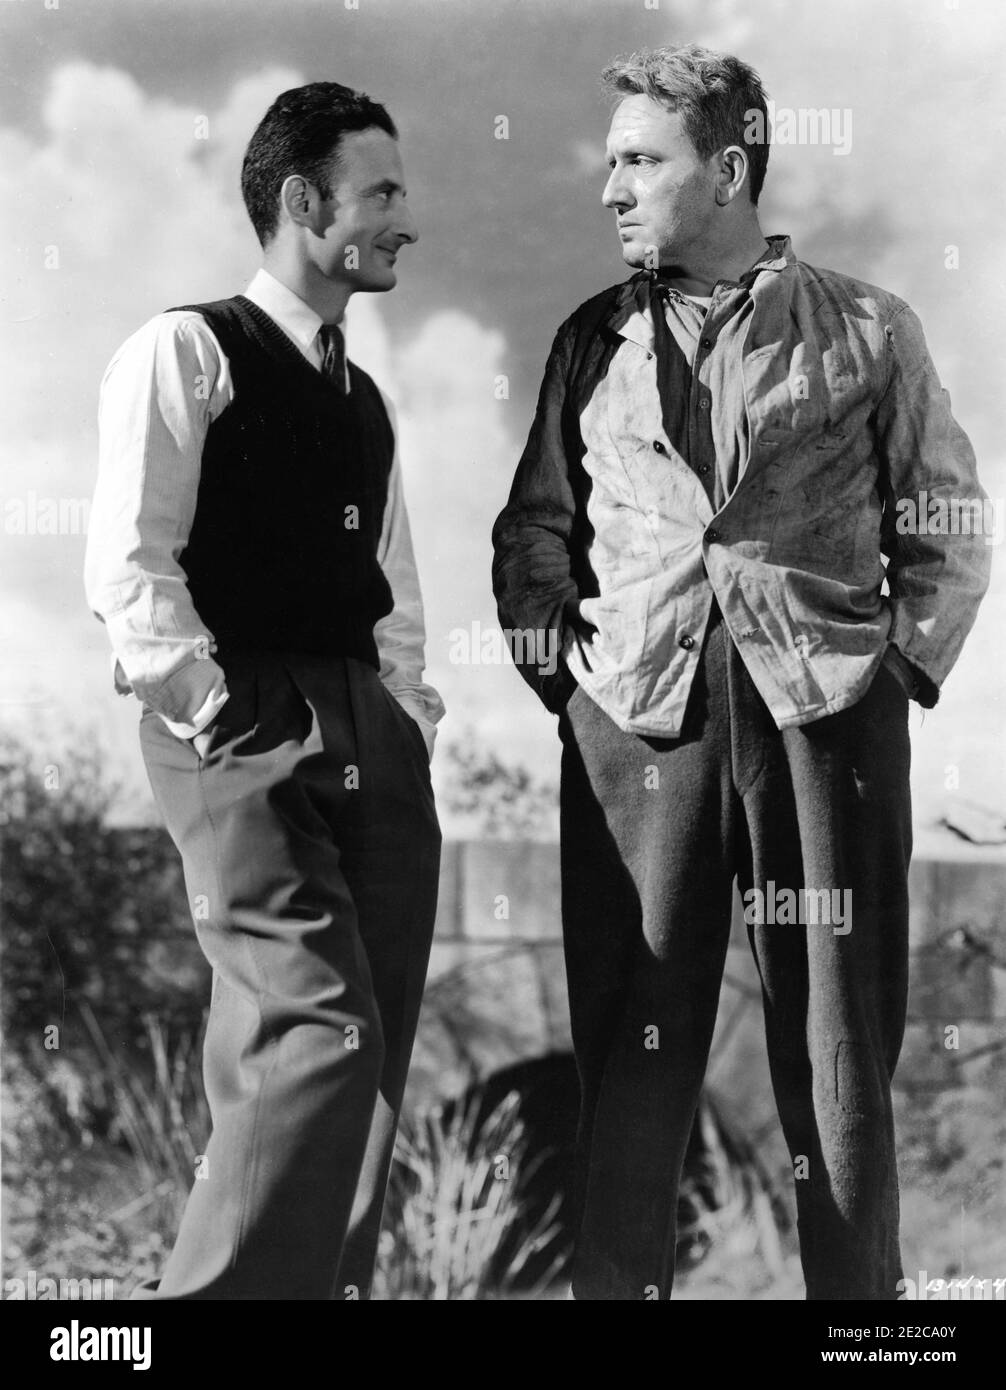 Director FRED ZINNEMANN and SPENCER TRACY on set candid during filming of THE SEVENTH CROSS 1944 director FRED ZINNEMANN based on novel by Anna Seghers Metro Goldwyn Mayer Stock Photo